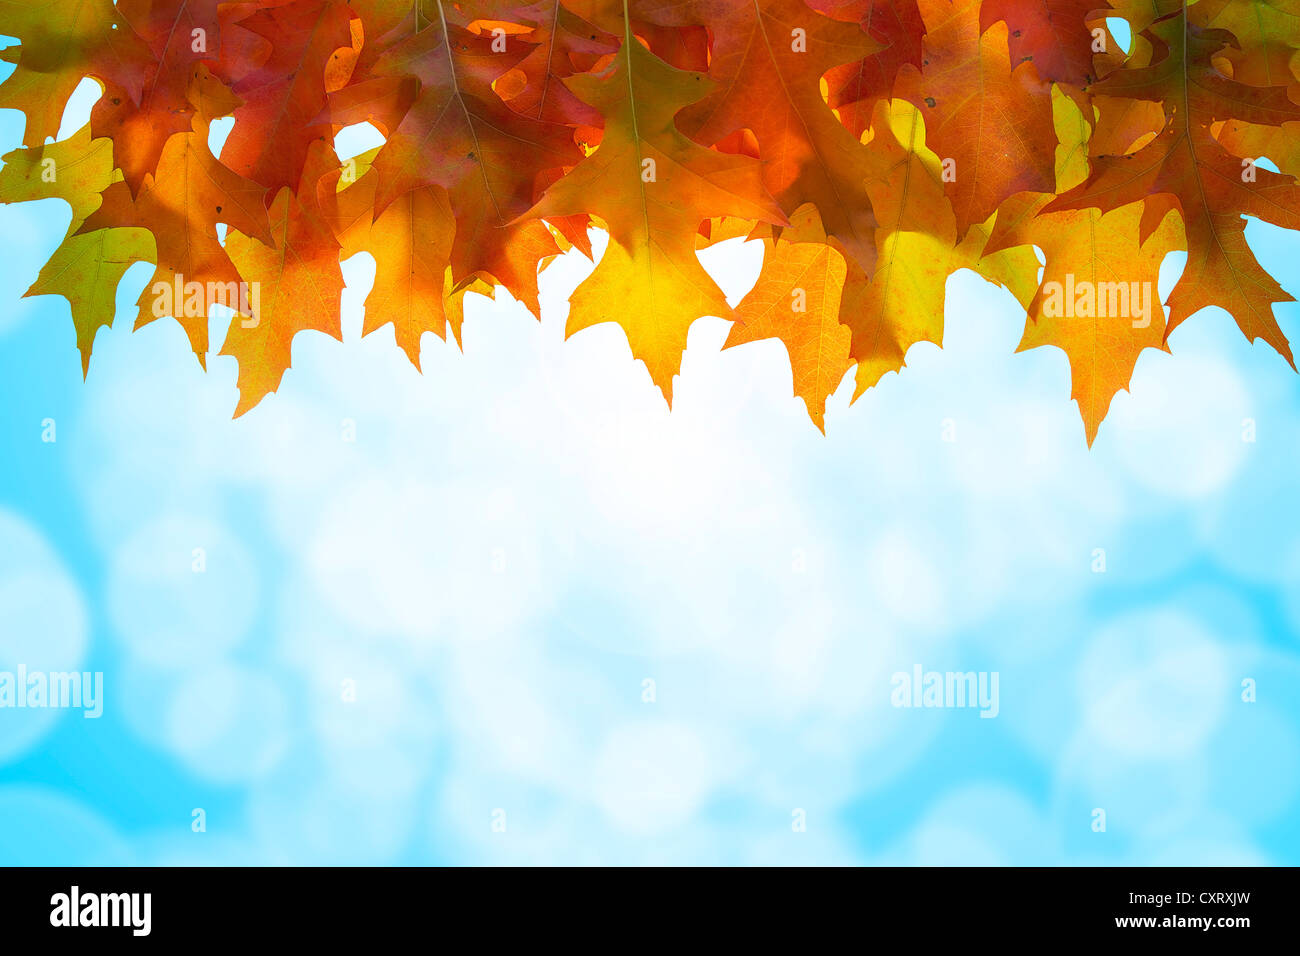 Hanging Autumn Oak Tree Leaves with Blue Sky Blurred Background Stock Photo